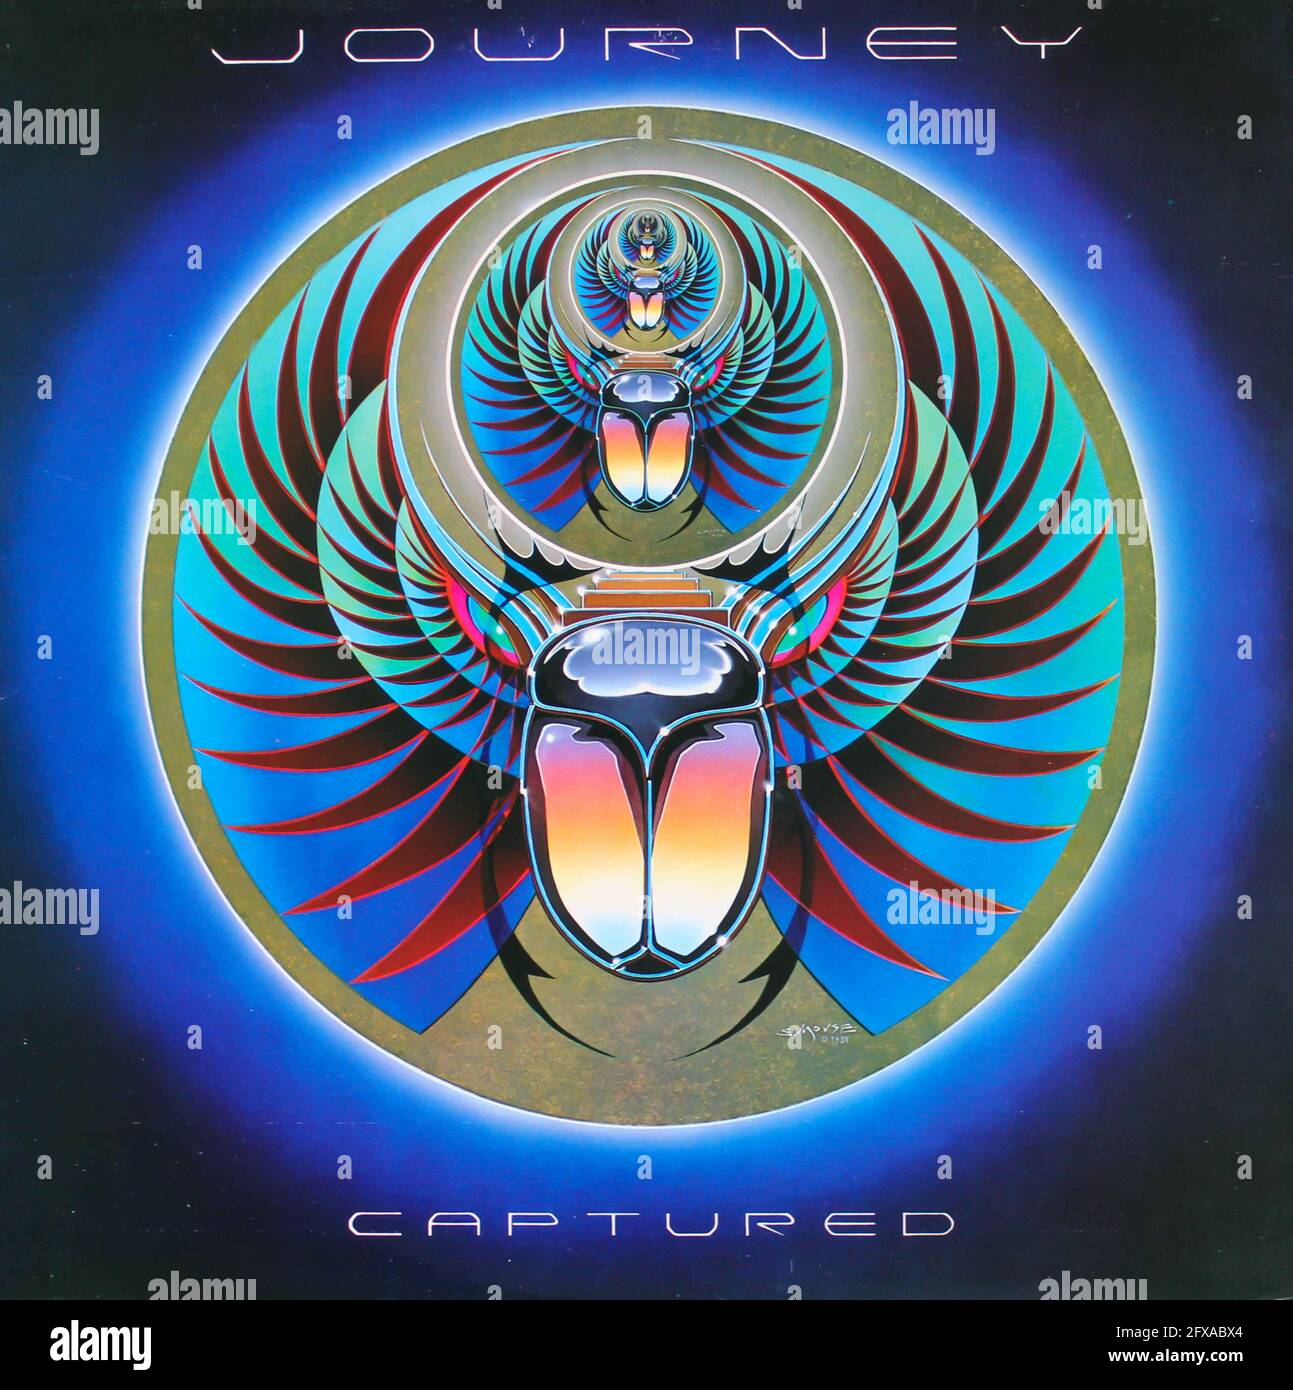 Hard rock and soft rock band, Journey band music album on vinyl record LP disc. Titled: Captured album cover Stock Photo